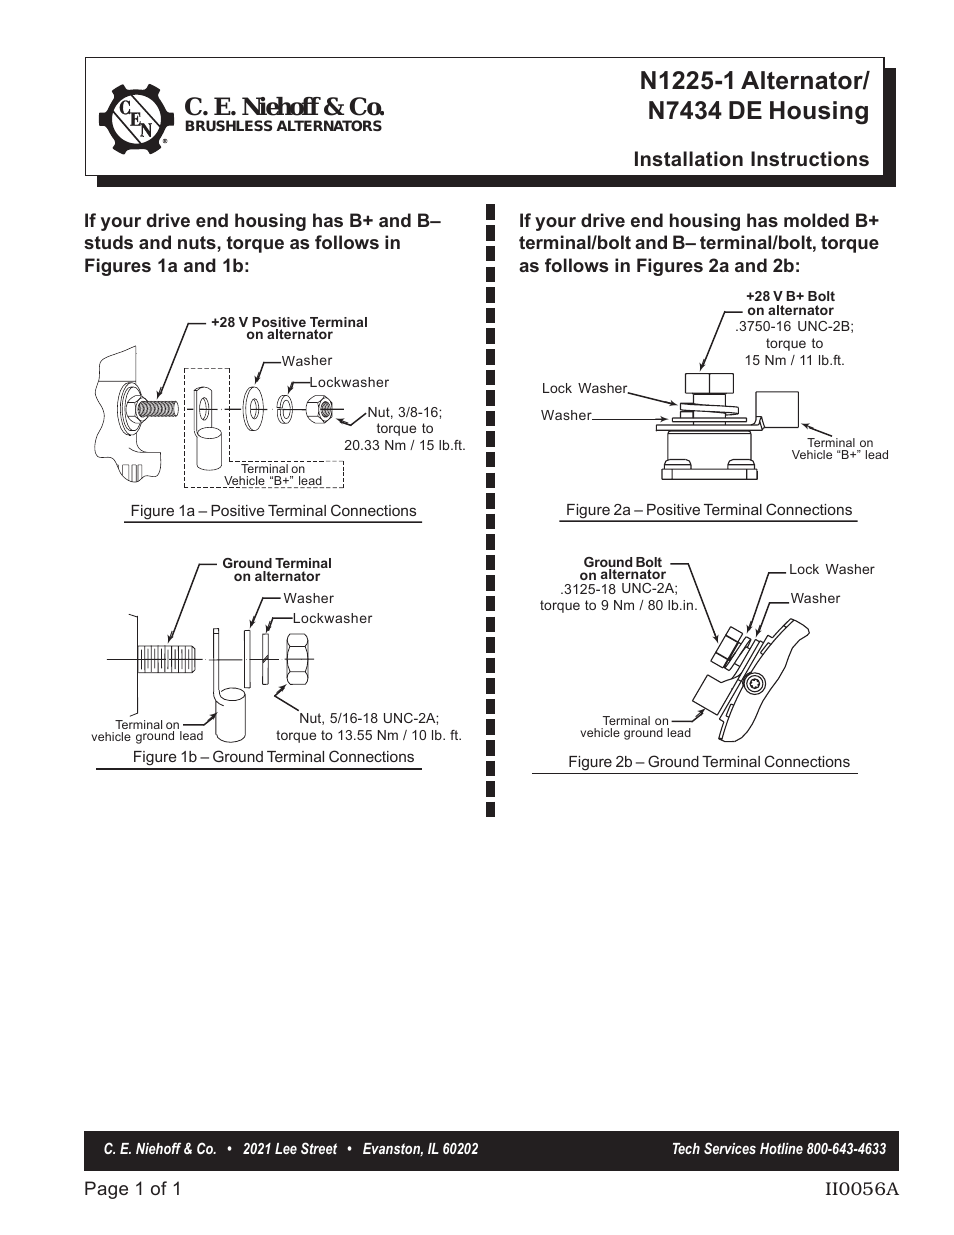 N7434 DE Housing Termination (Old & New) Instructions